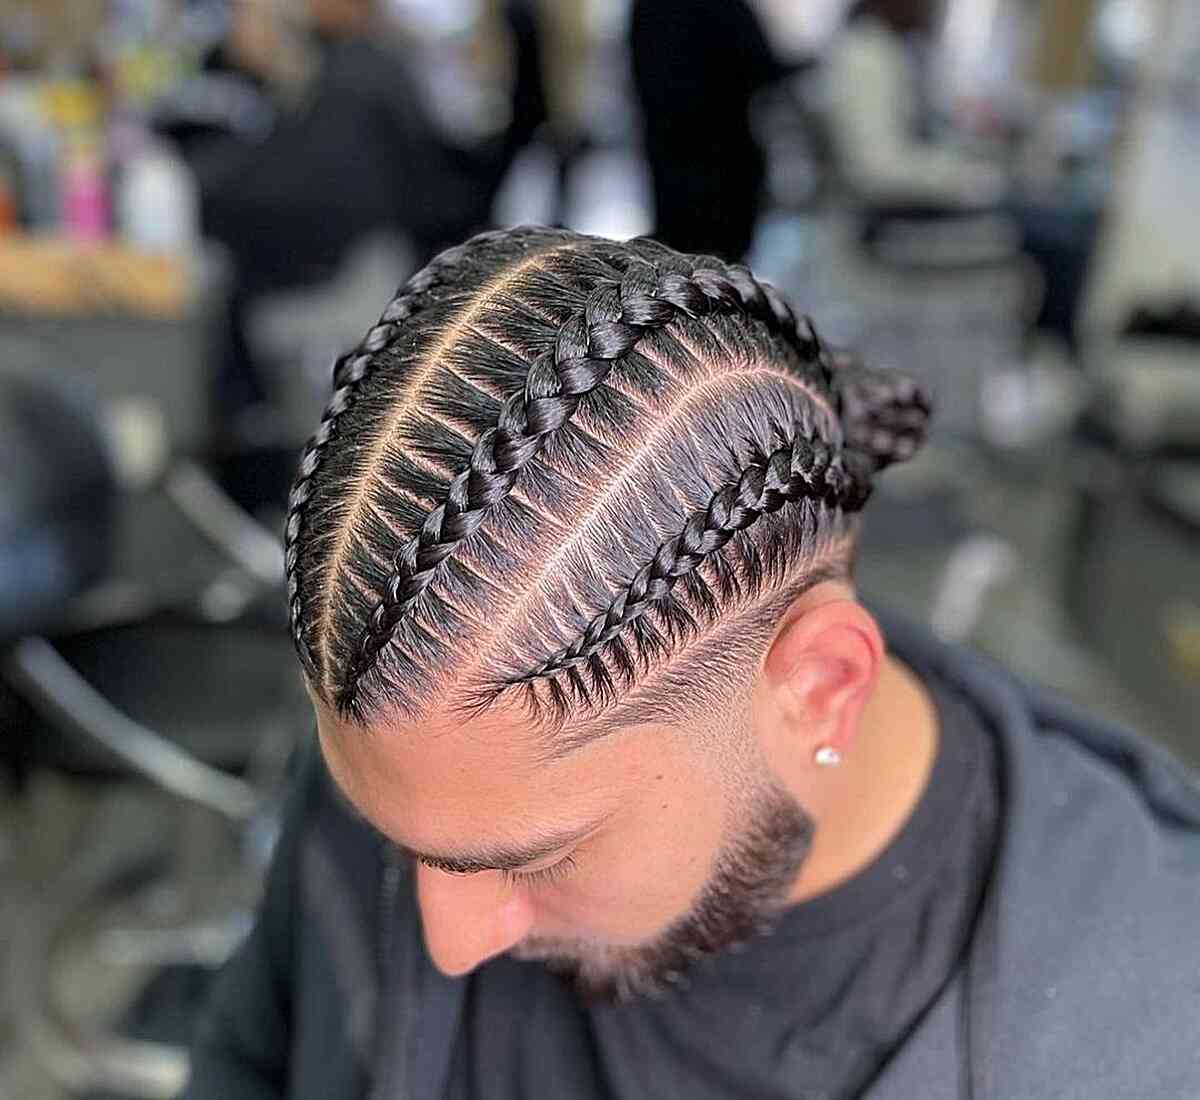 White Boy Braids: Braided Styles for Caucasian Men and Boys